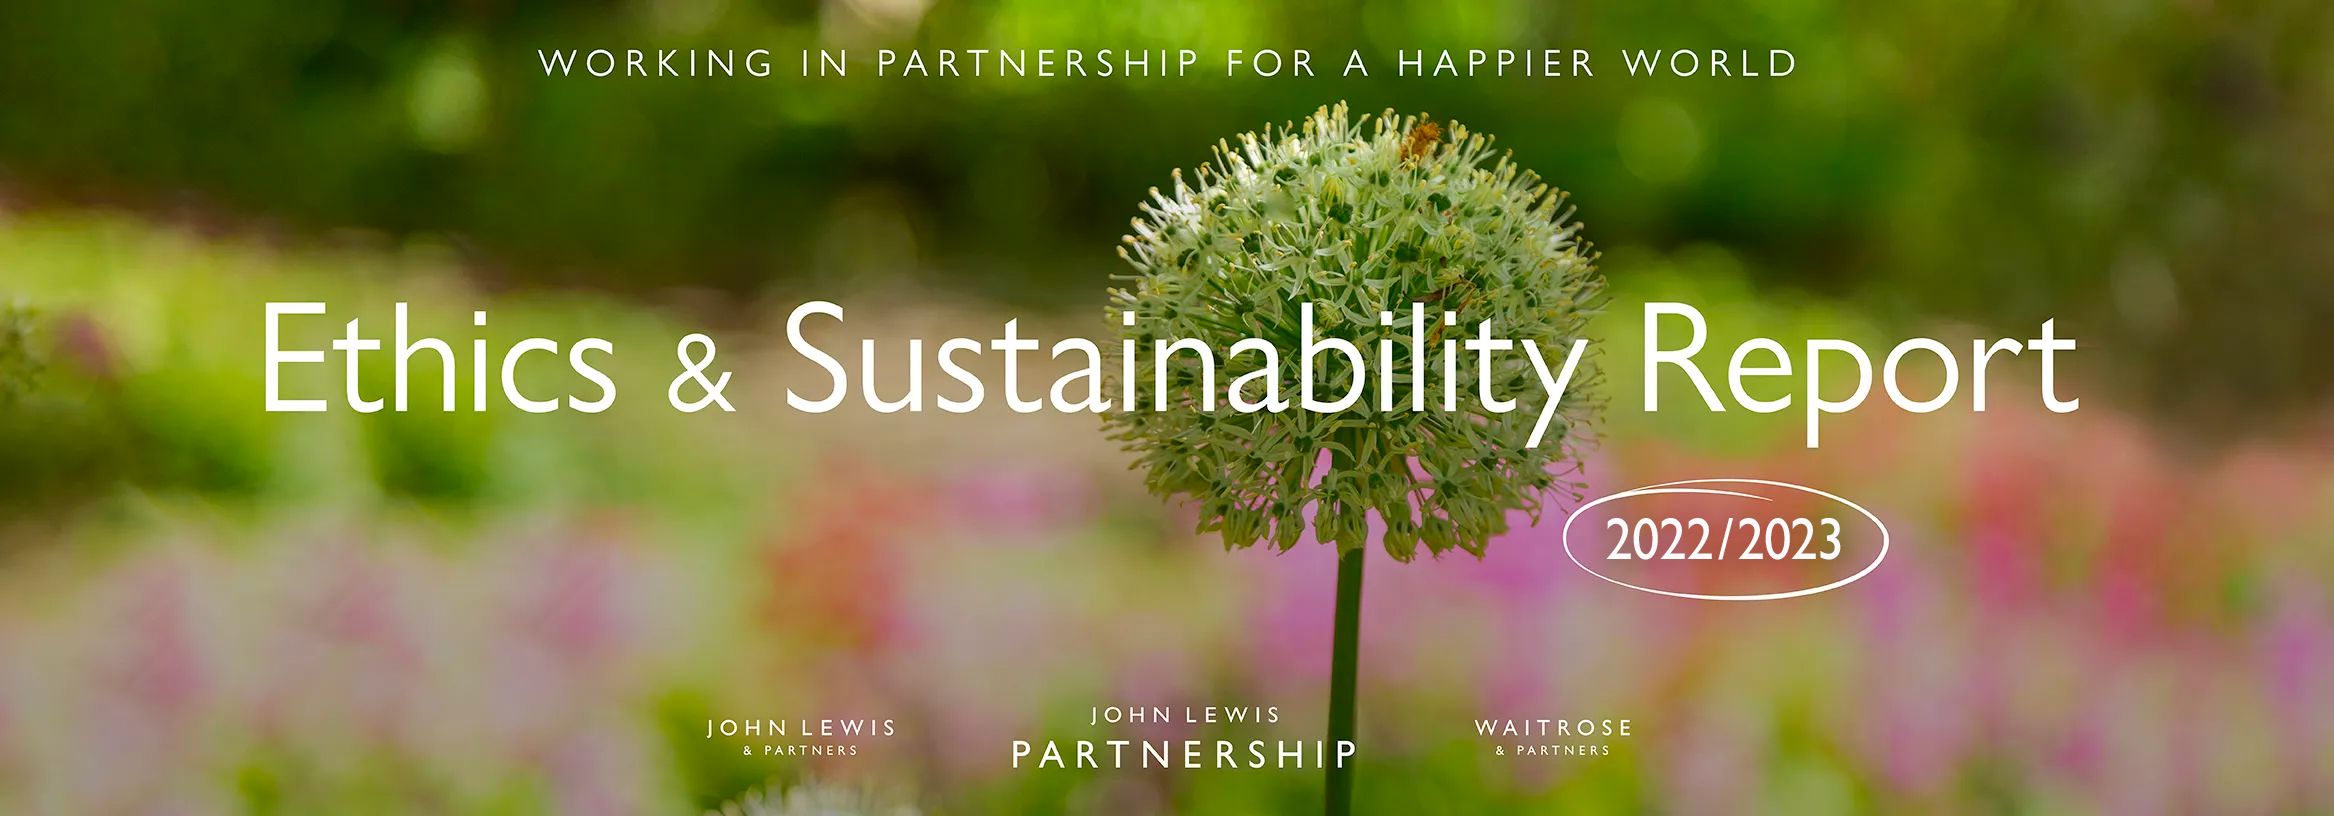 Ethics and Sustainability banner